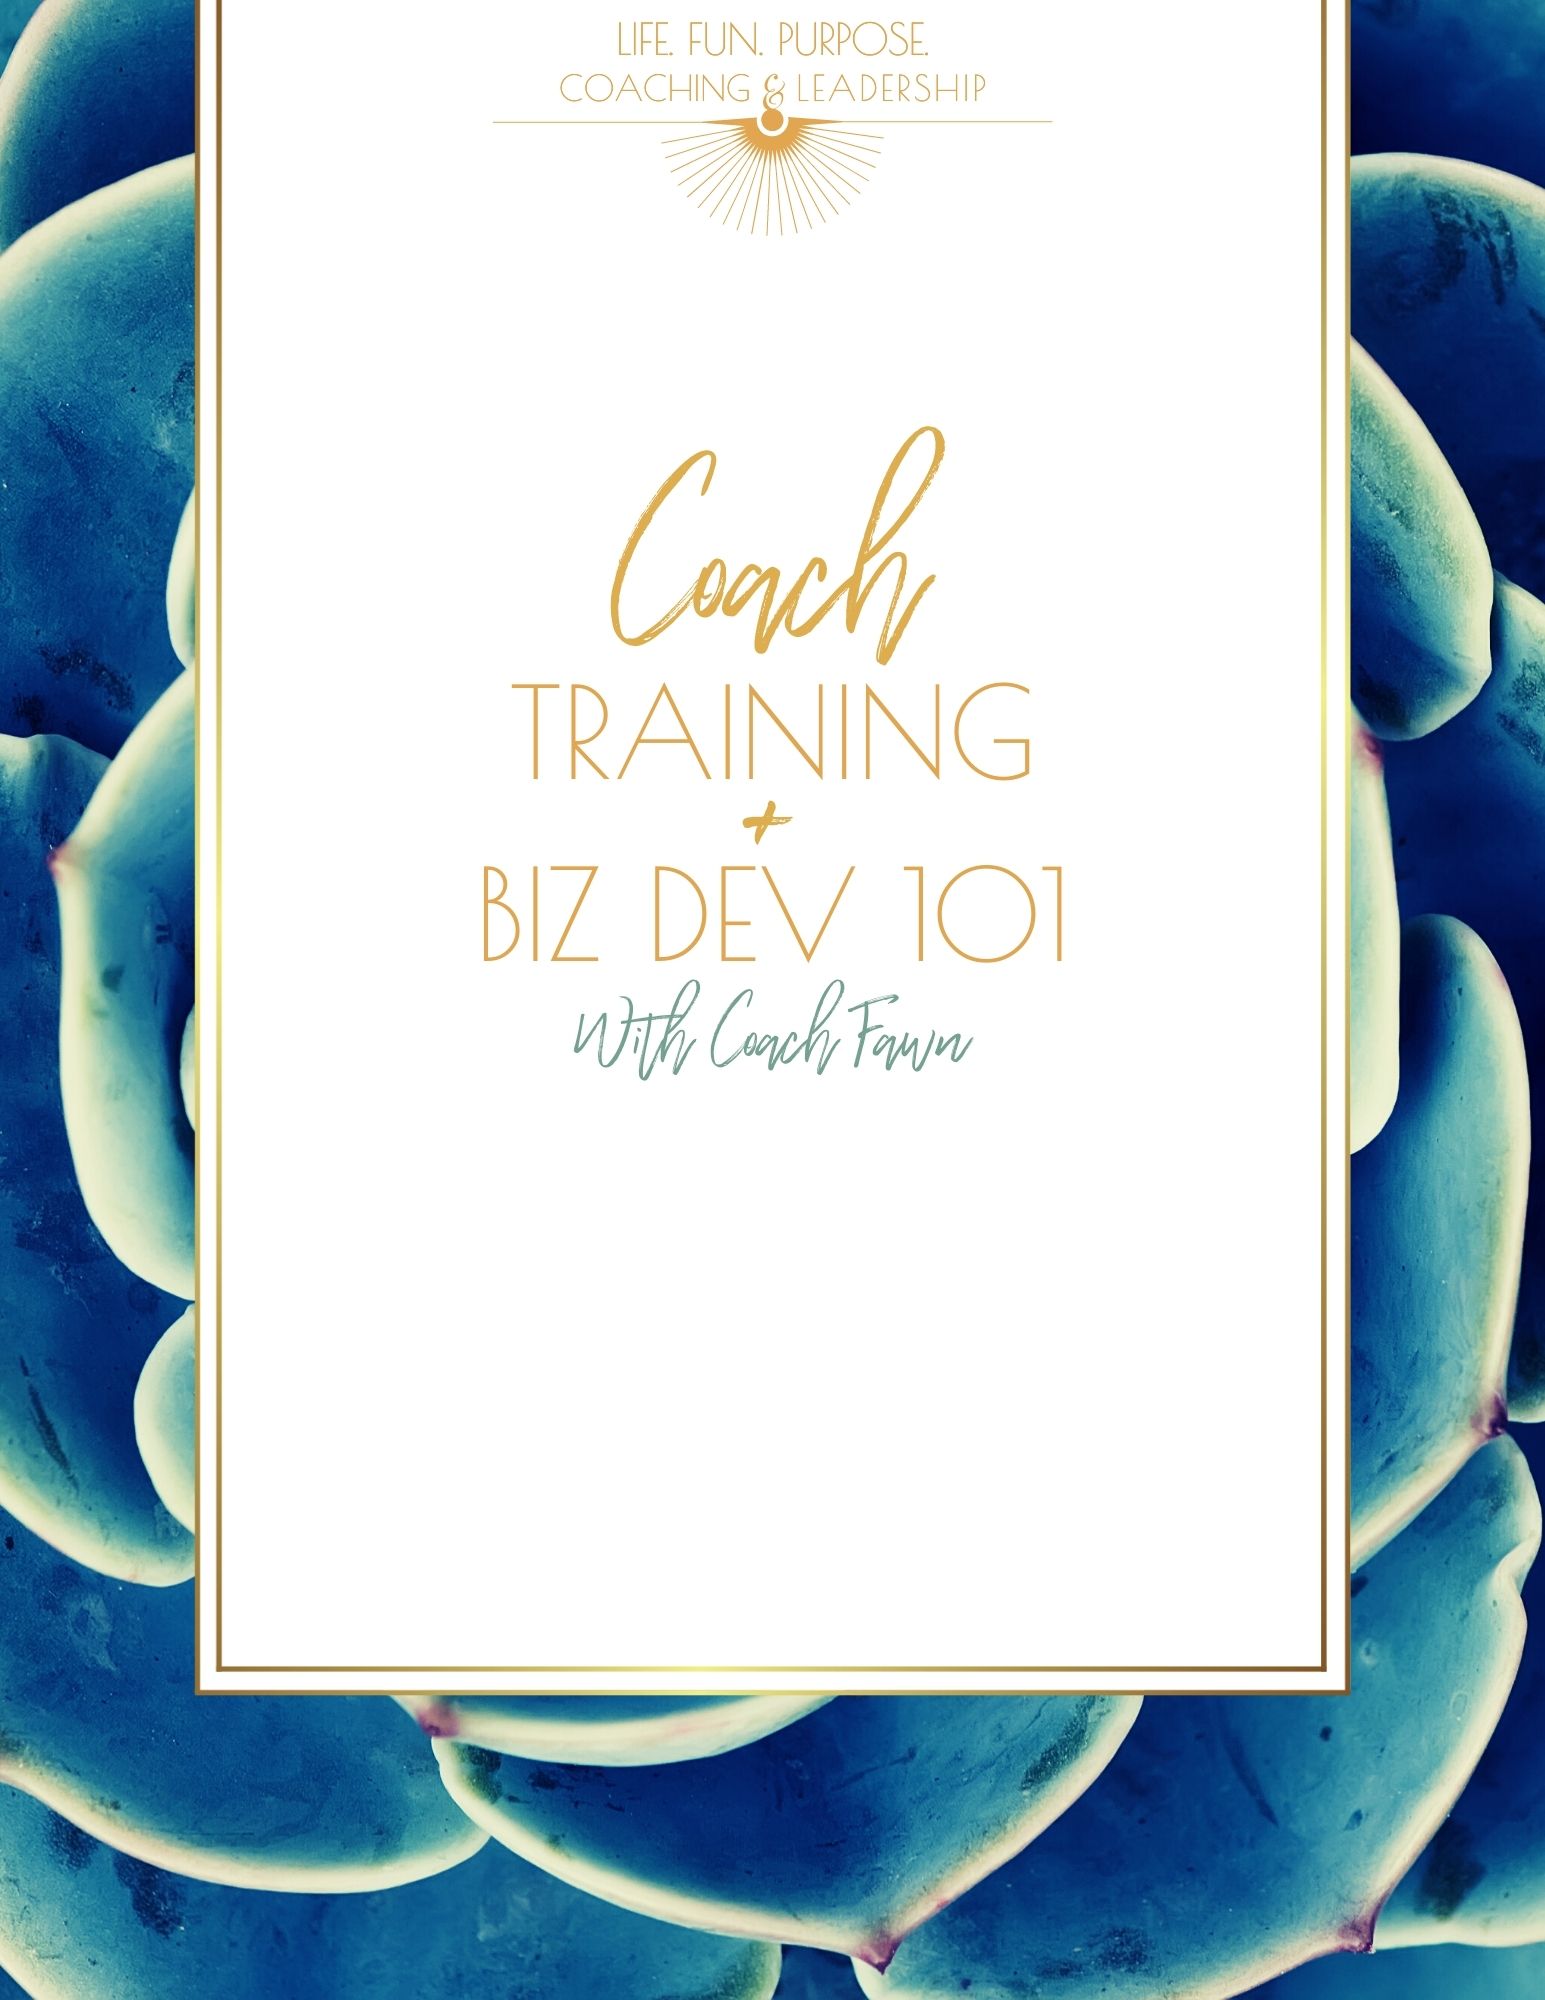 COACH TRAINING 101 COVER